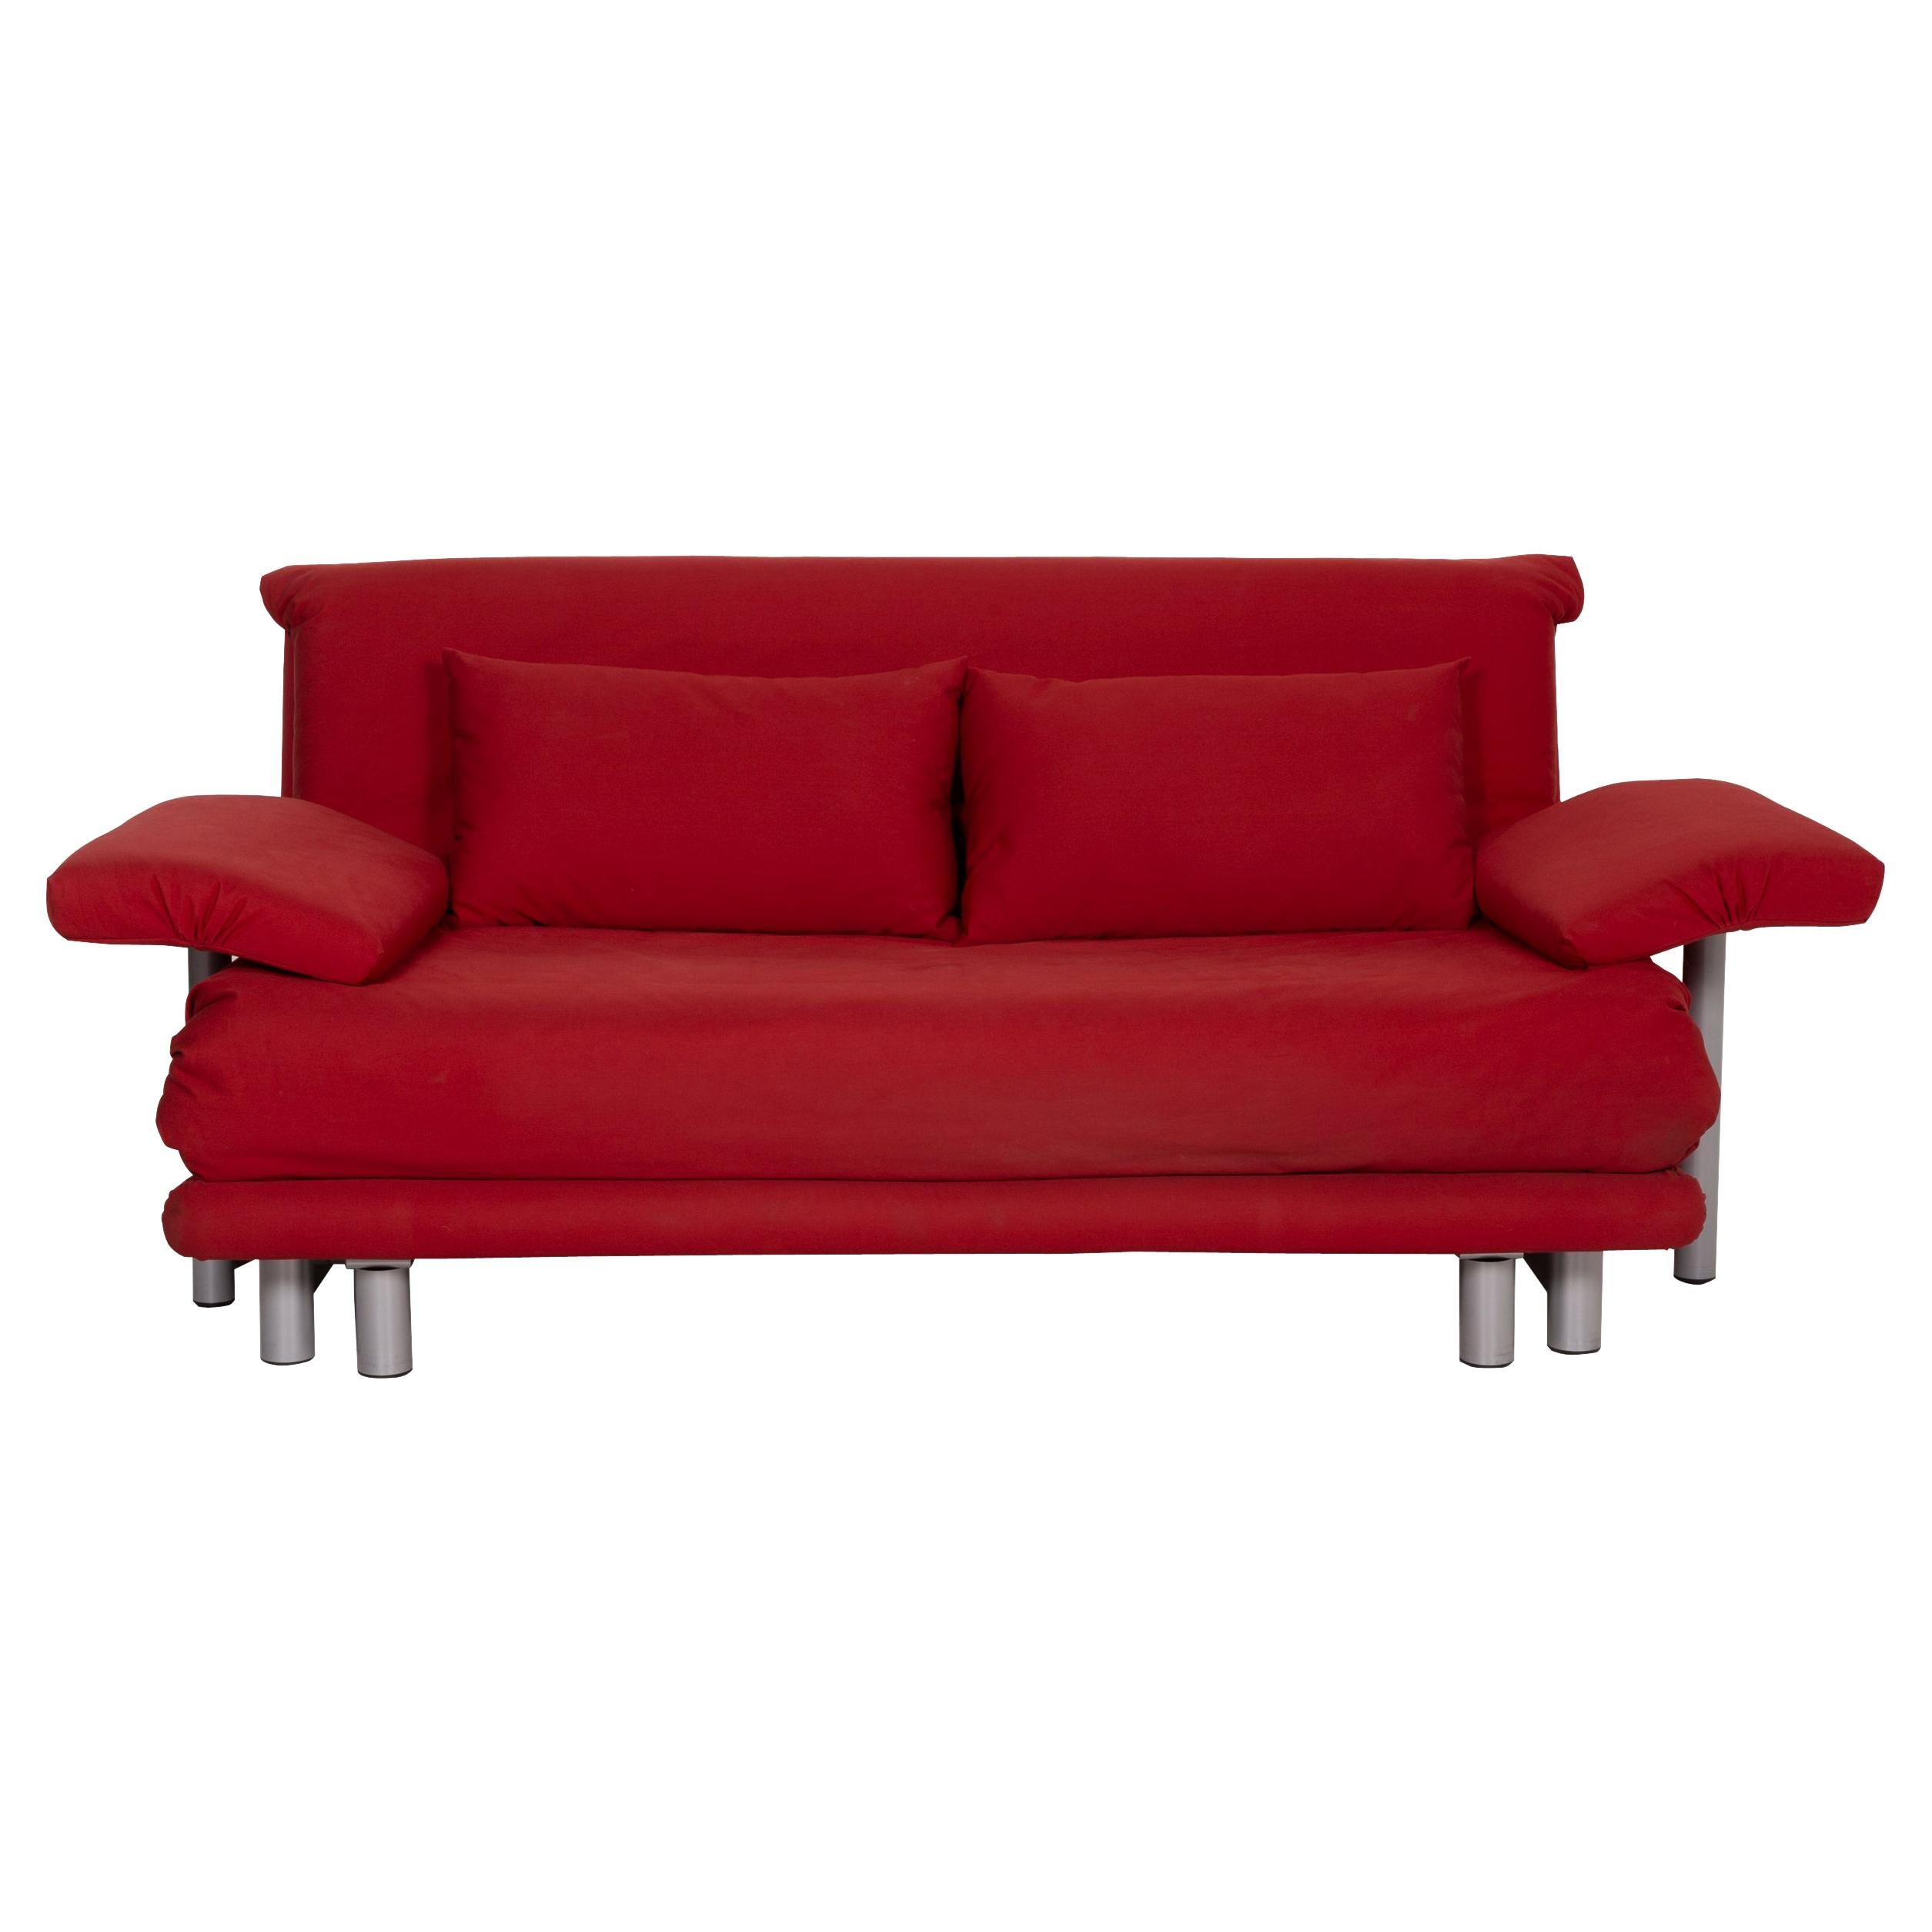 Ligne Roset Multy Fabric Sofa Red Two-Seater Sleeping Function Sofa Bed